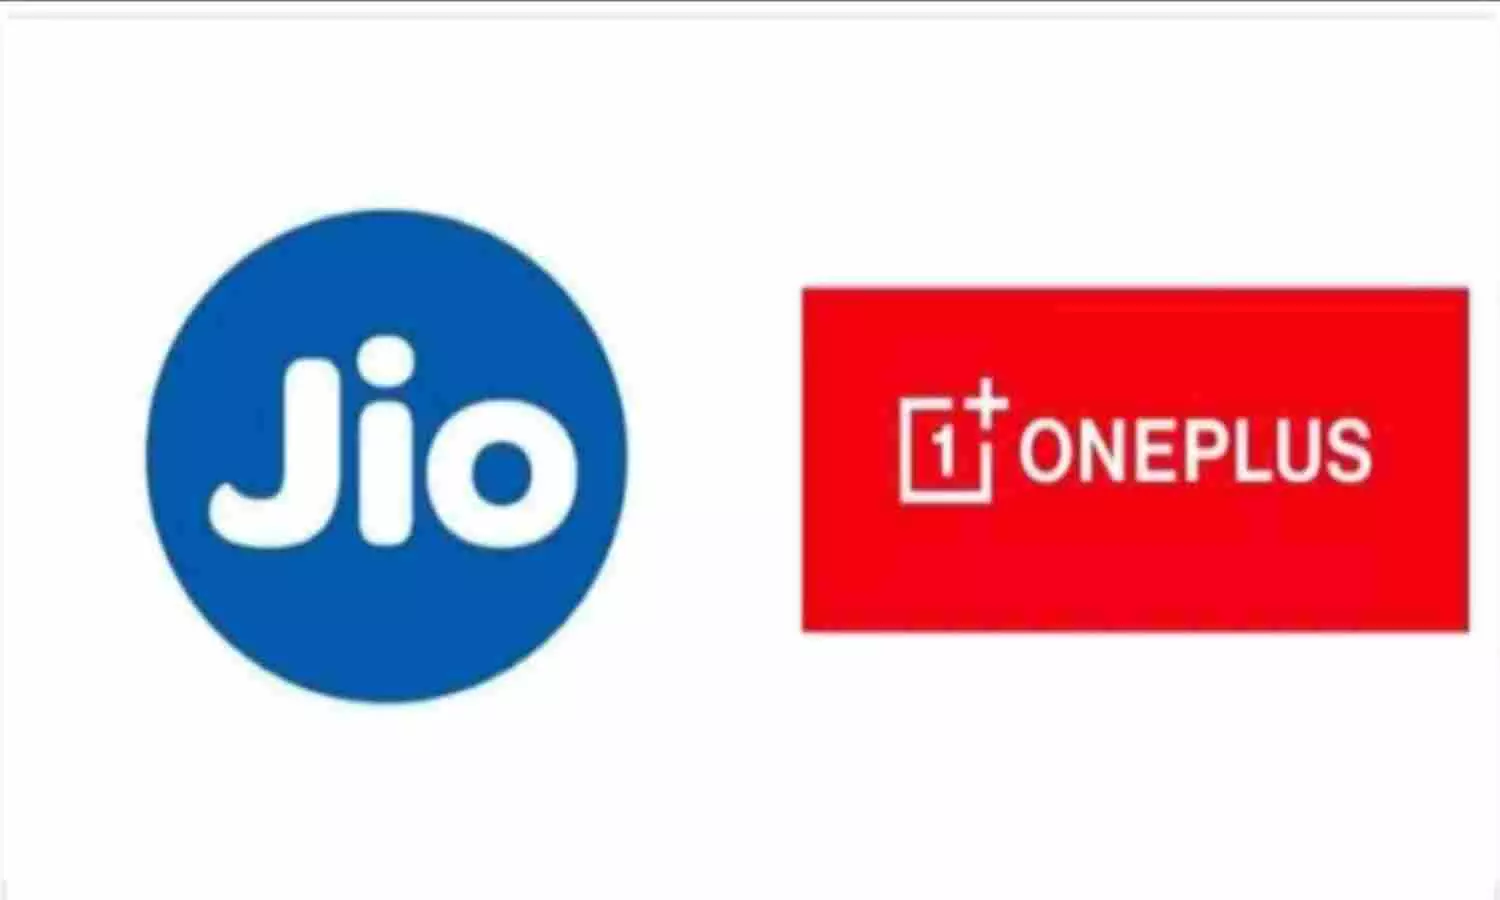 Reliance Jio and OnePlus India